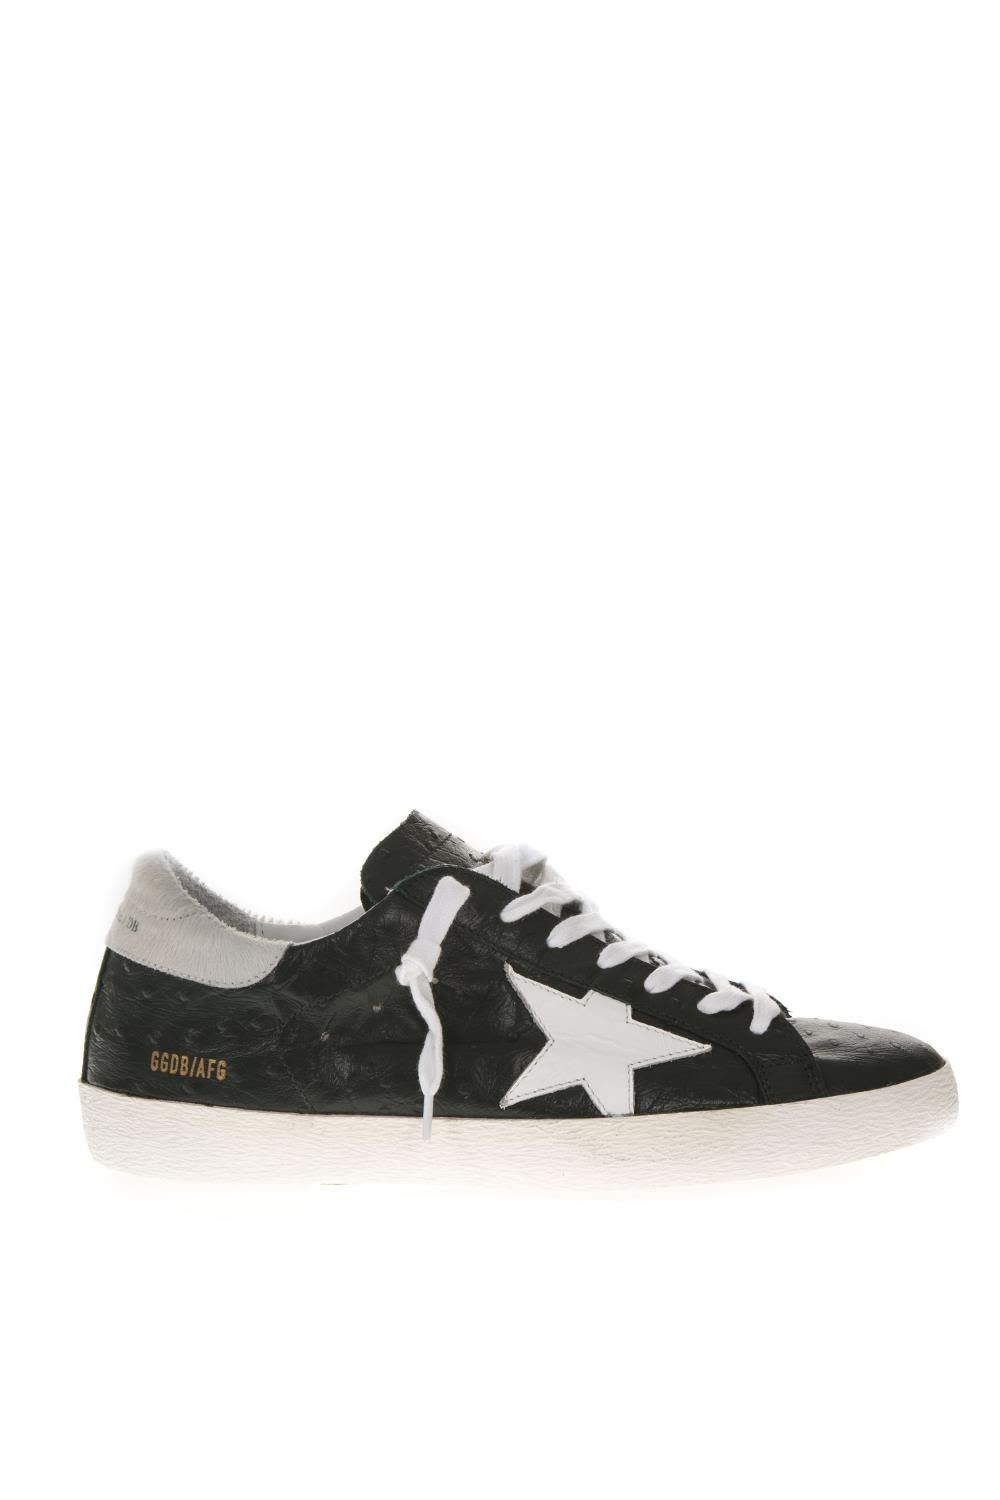 Golden Goose Black Superstar Sneakers In Leather With White Details | Italist.com US